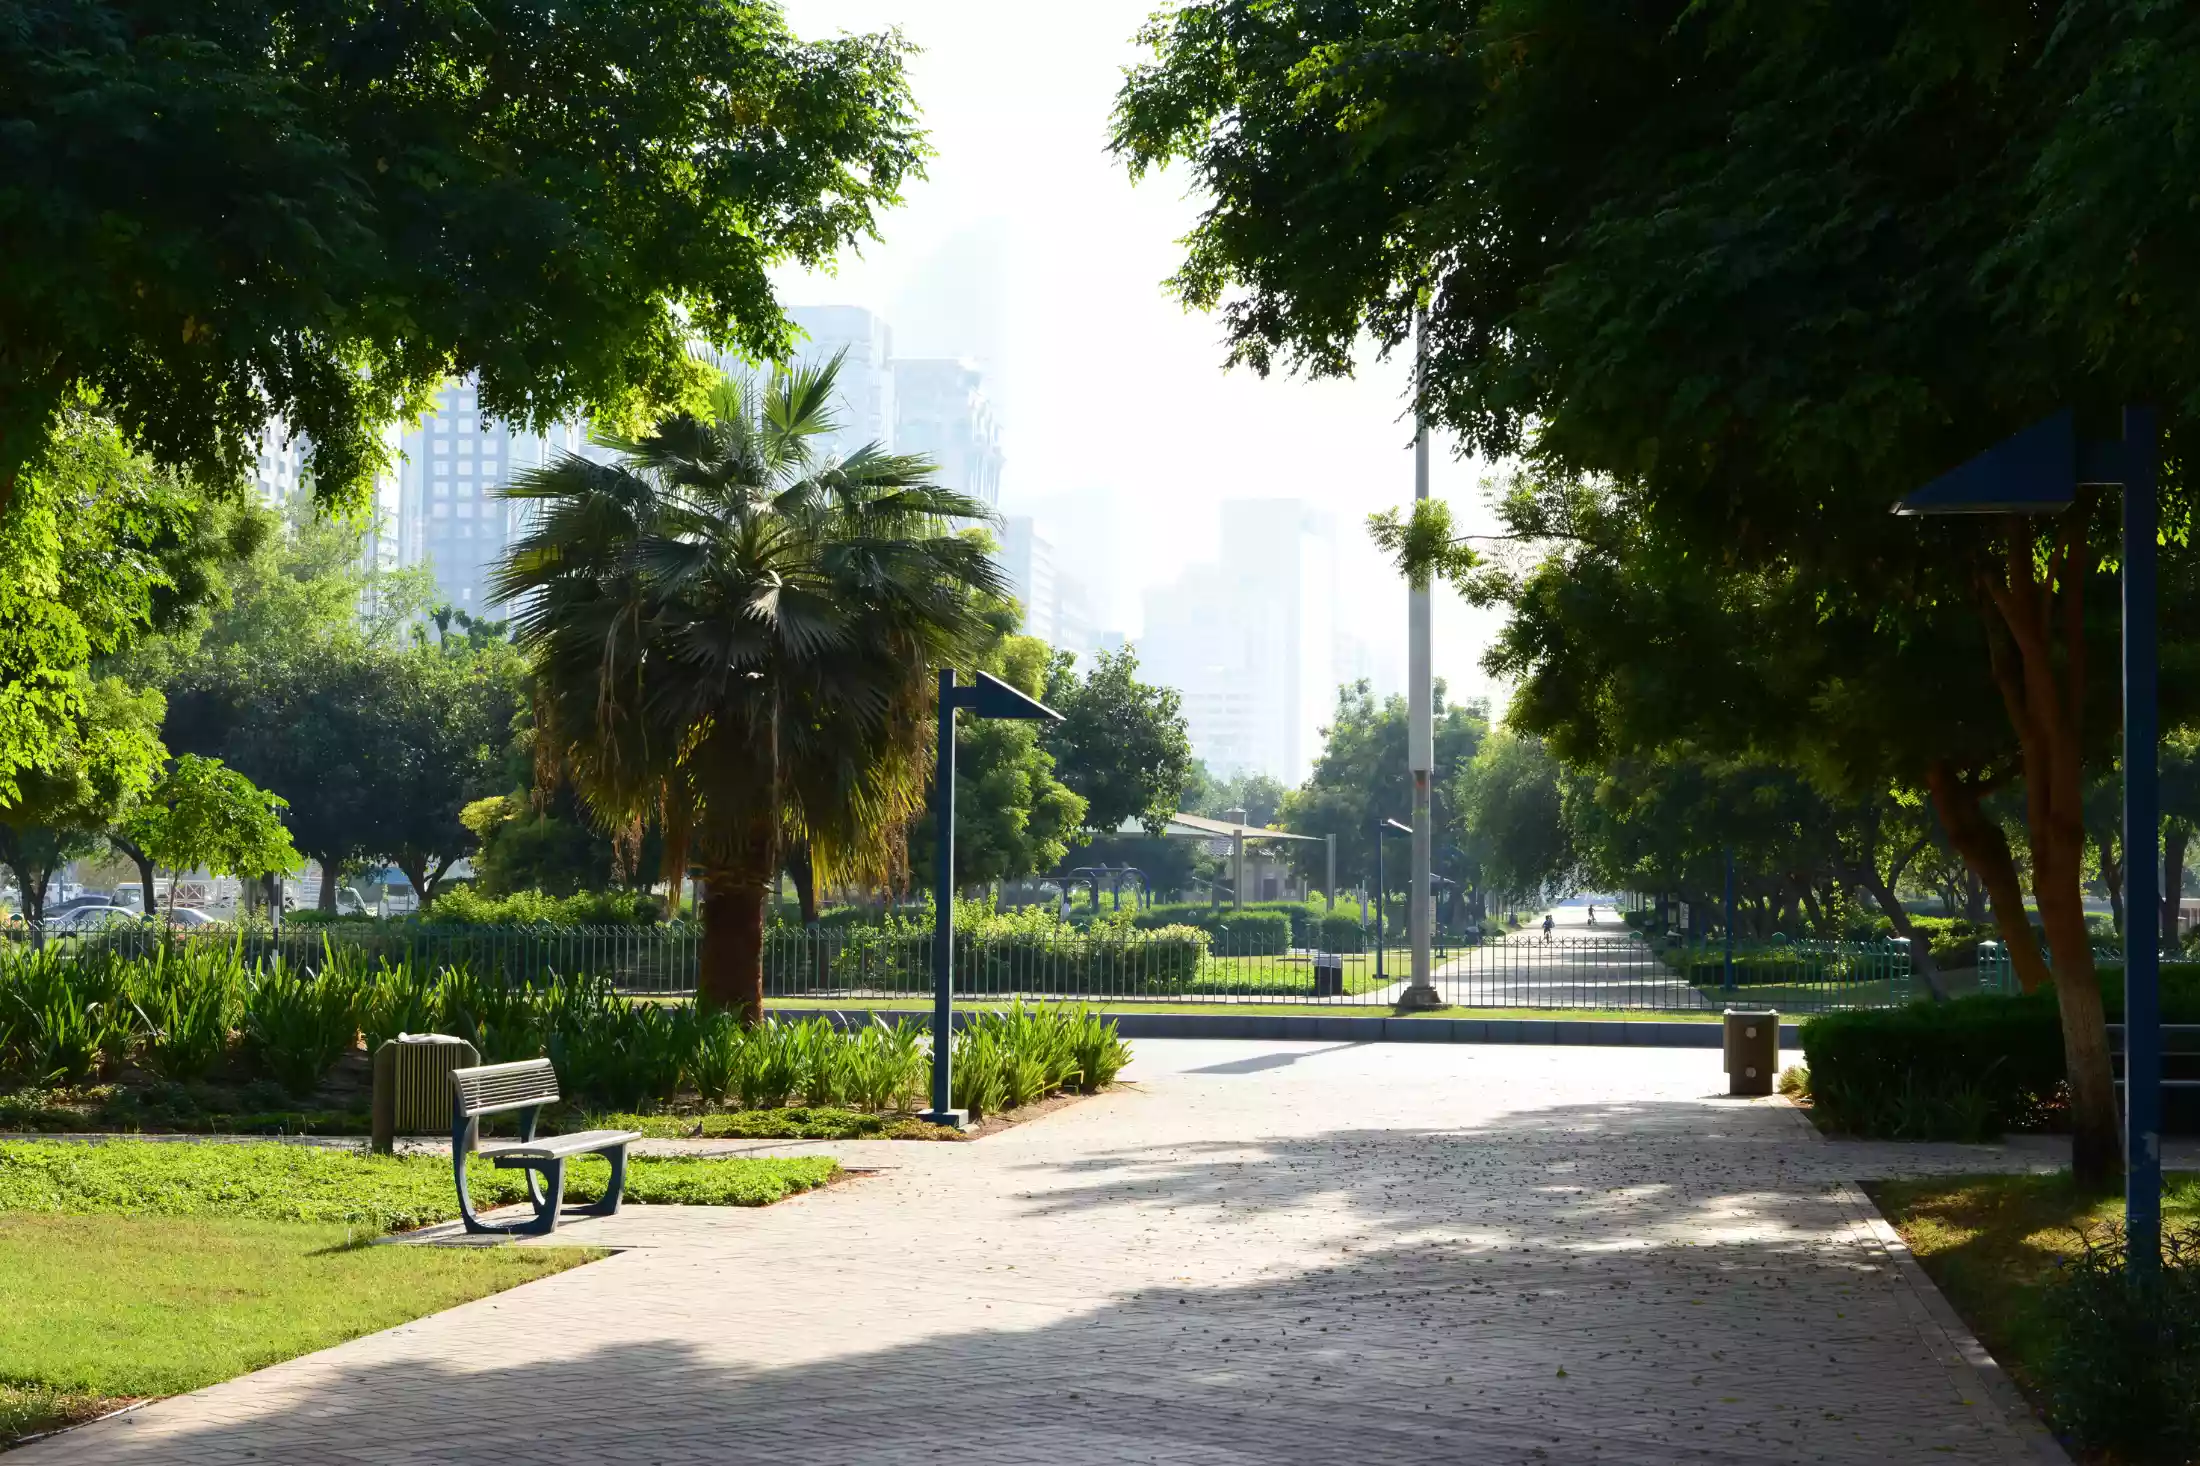 One of the parks of the Corniche Abu Dhabi